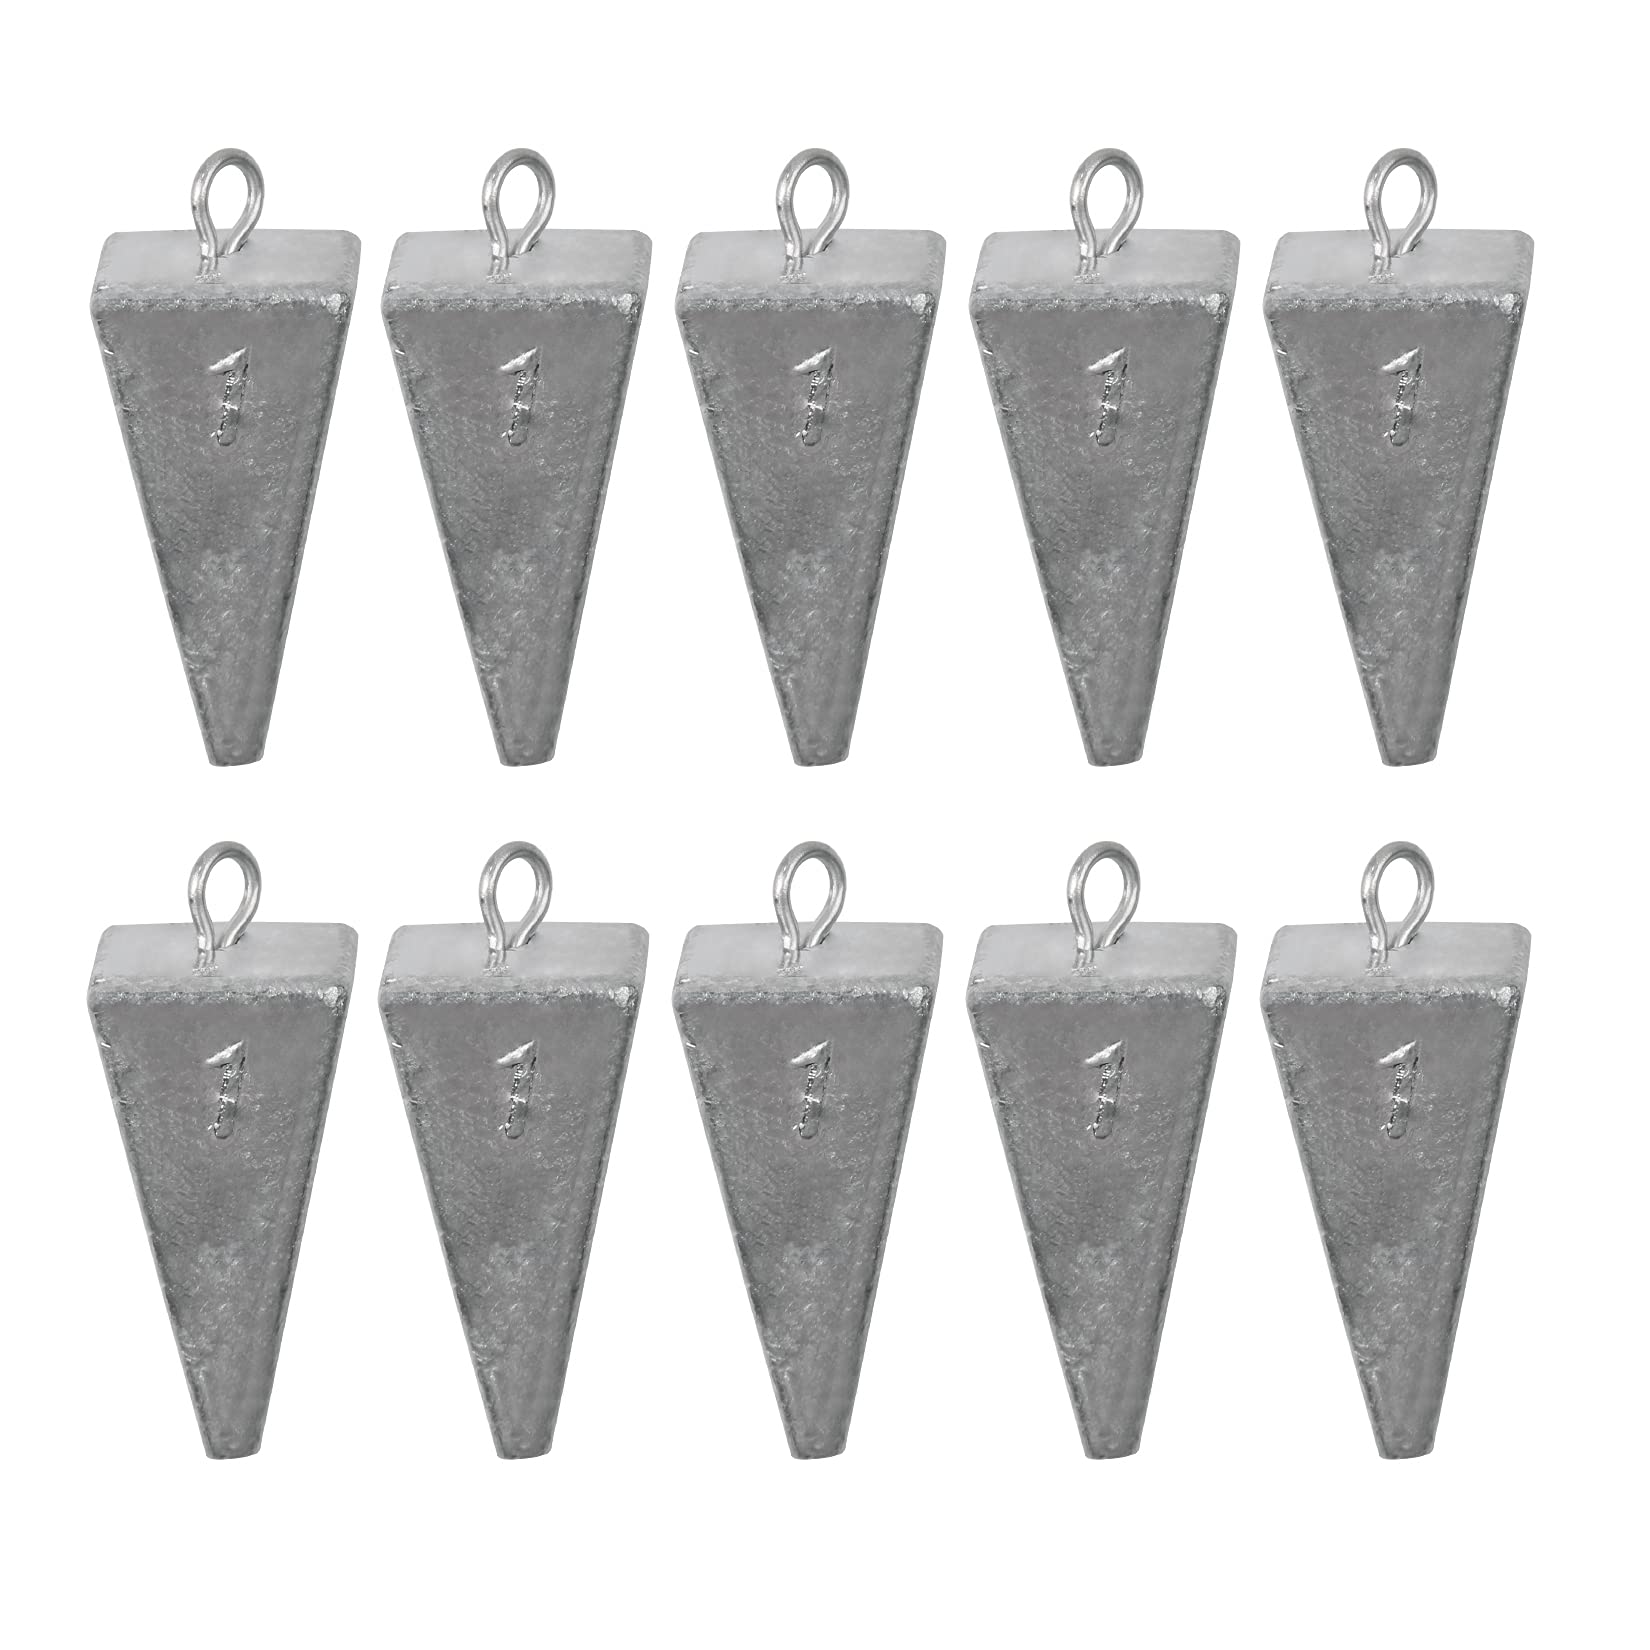 Pyramid Sinkers Fishing Weights Kit Bullet Fishing Weights Sinkers for  Ocean Saltwater Surf Fishing Gear Tackle 1oz 2oz 3oz 4oz 5oz 6oz 8oz 1oz -  10pcs